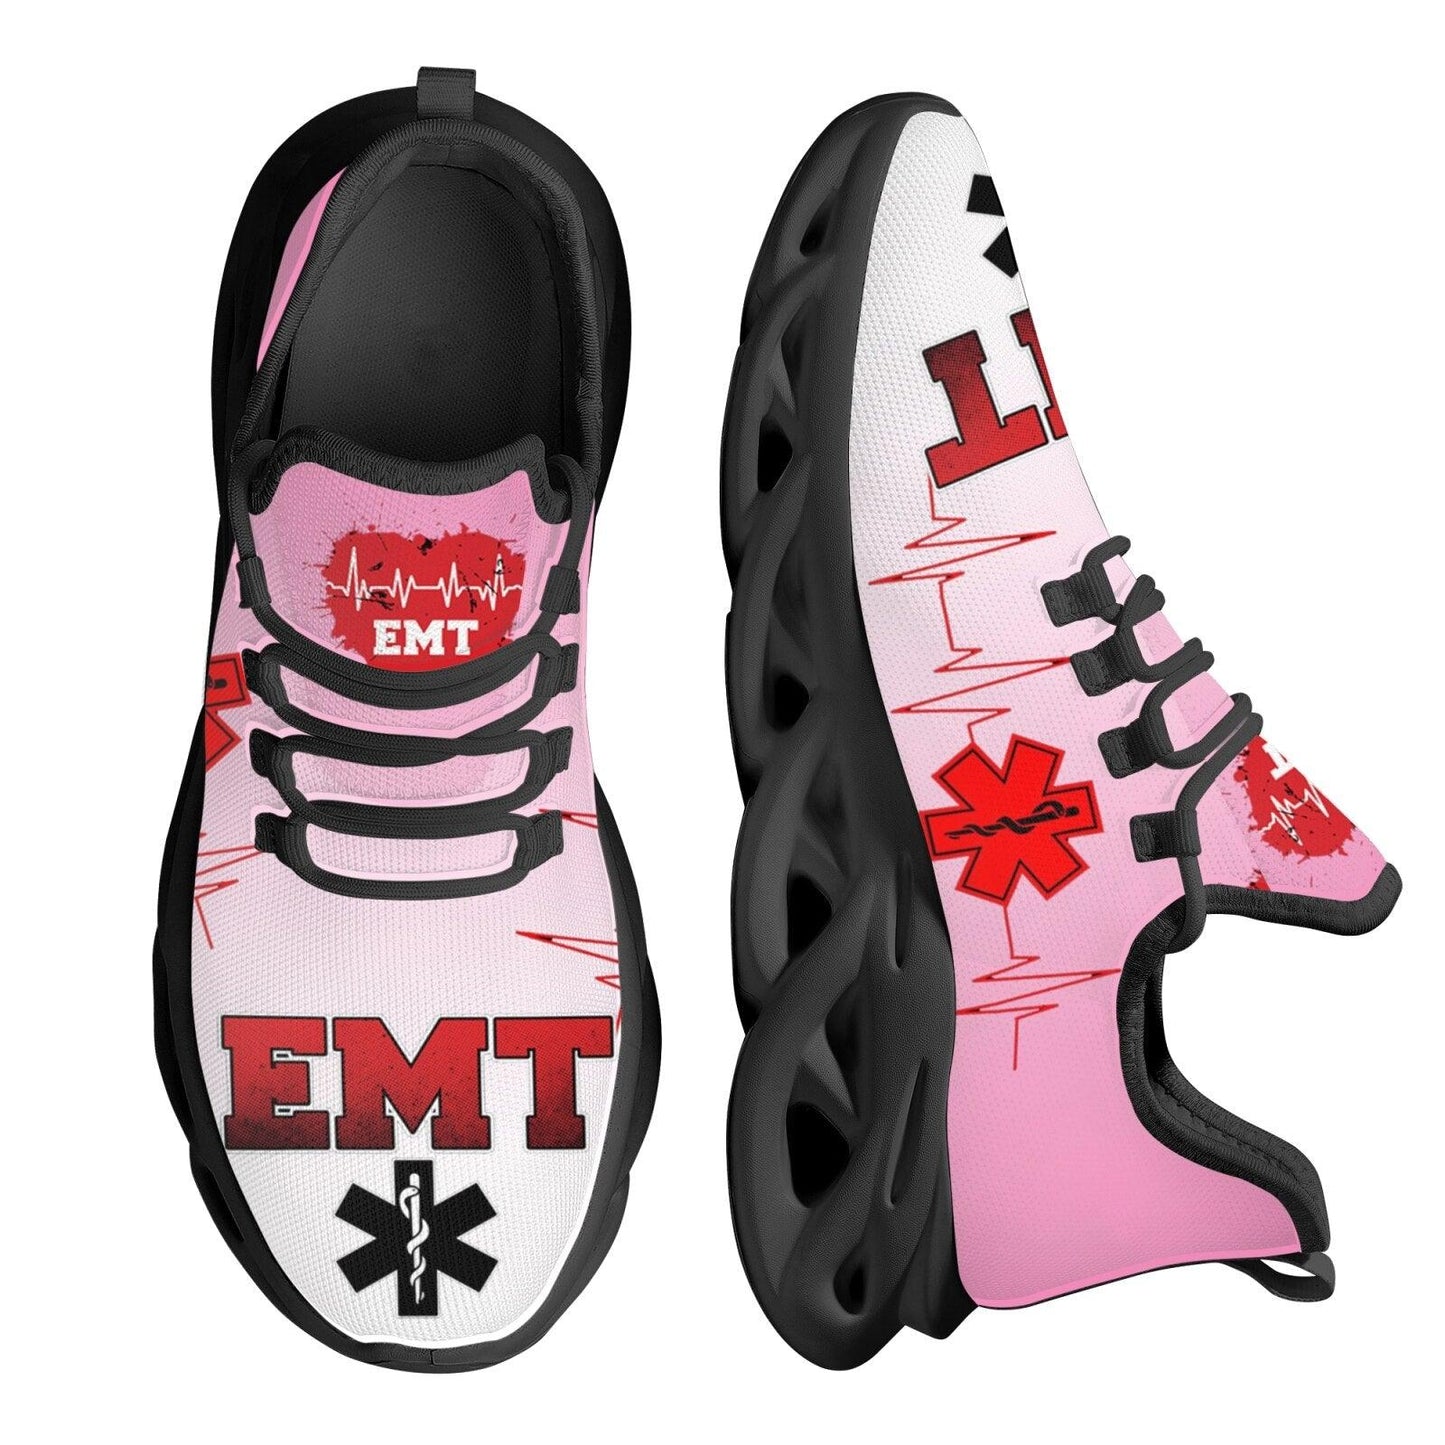 Paramedic EMT EMS Pattern Mesh Pink Sneakers for Women Breathable Footwear